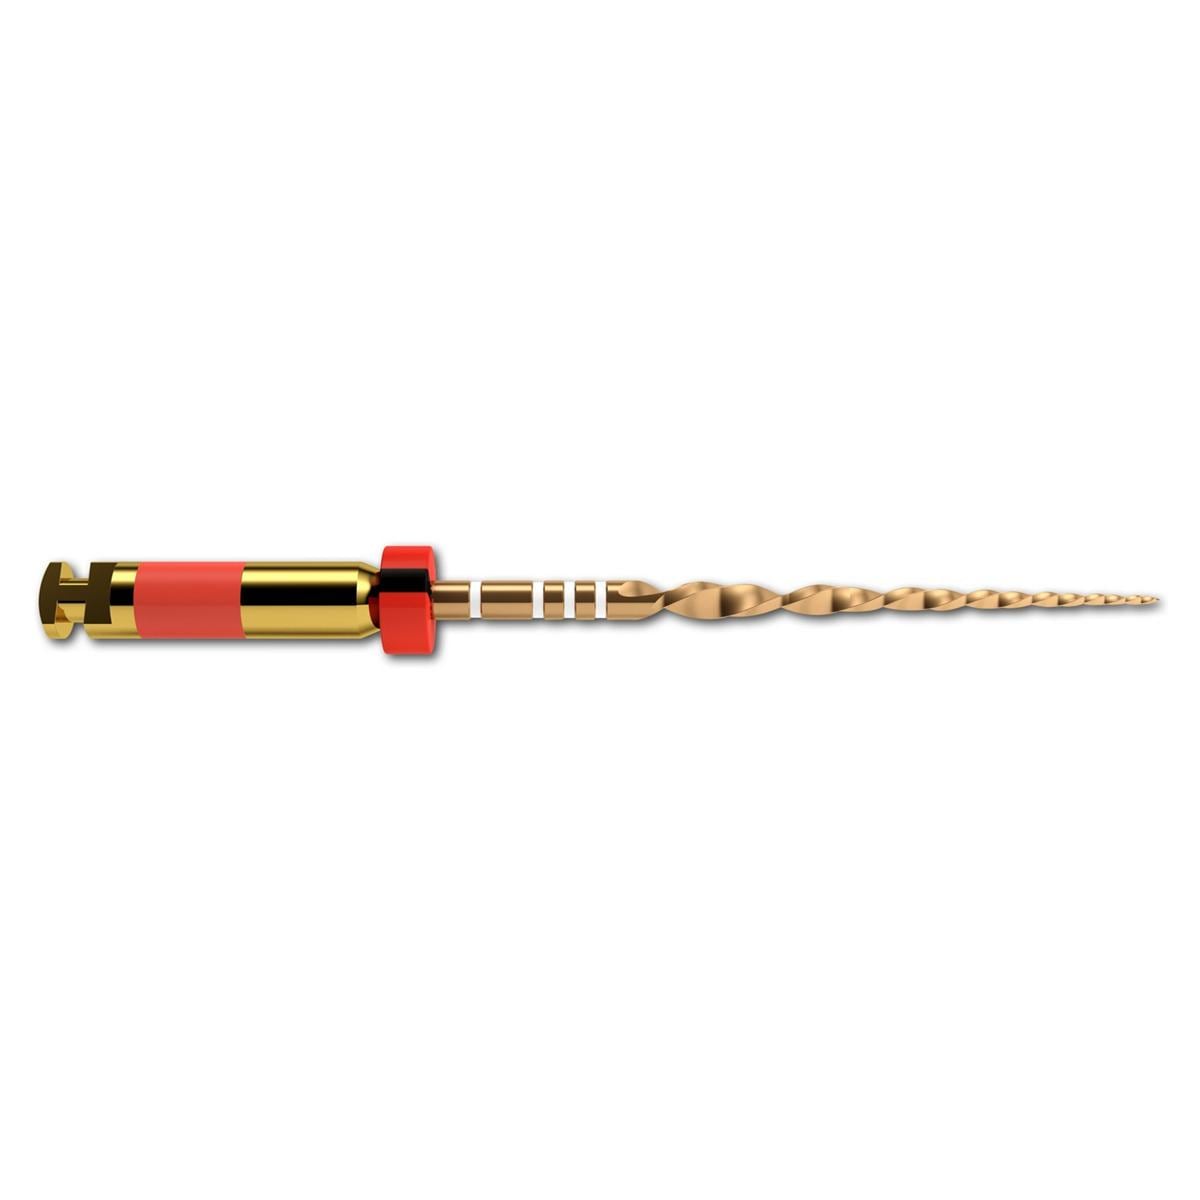 WaveOne Gold - primary, rouge, 31 mm